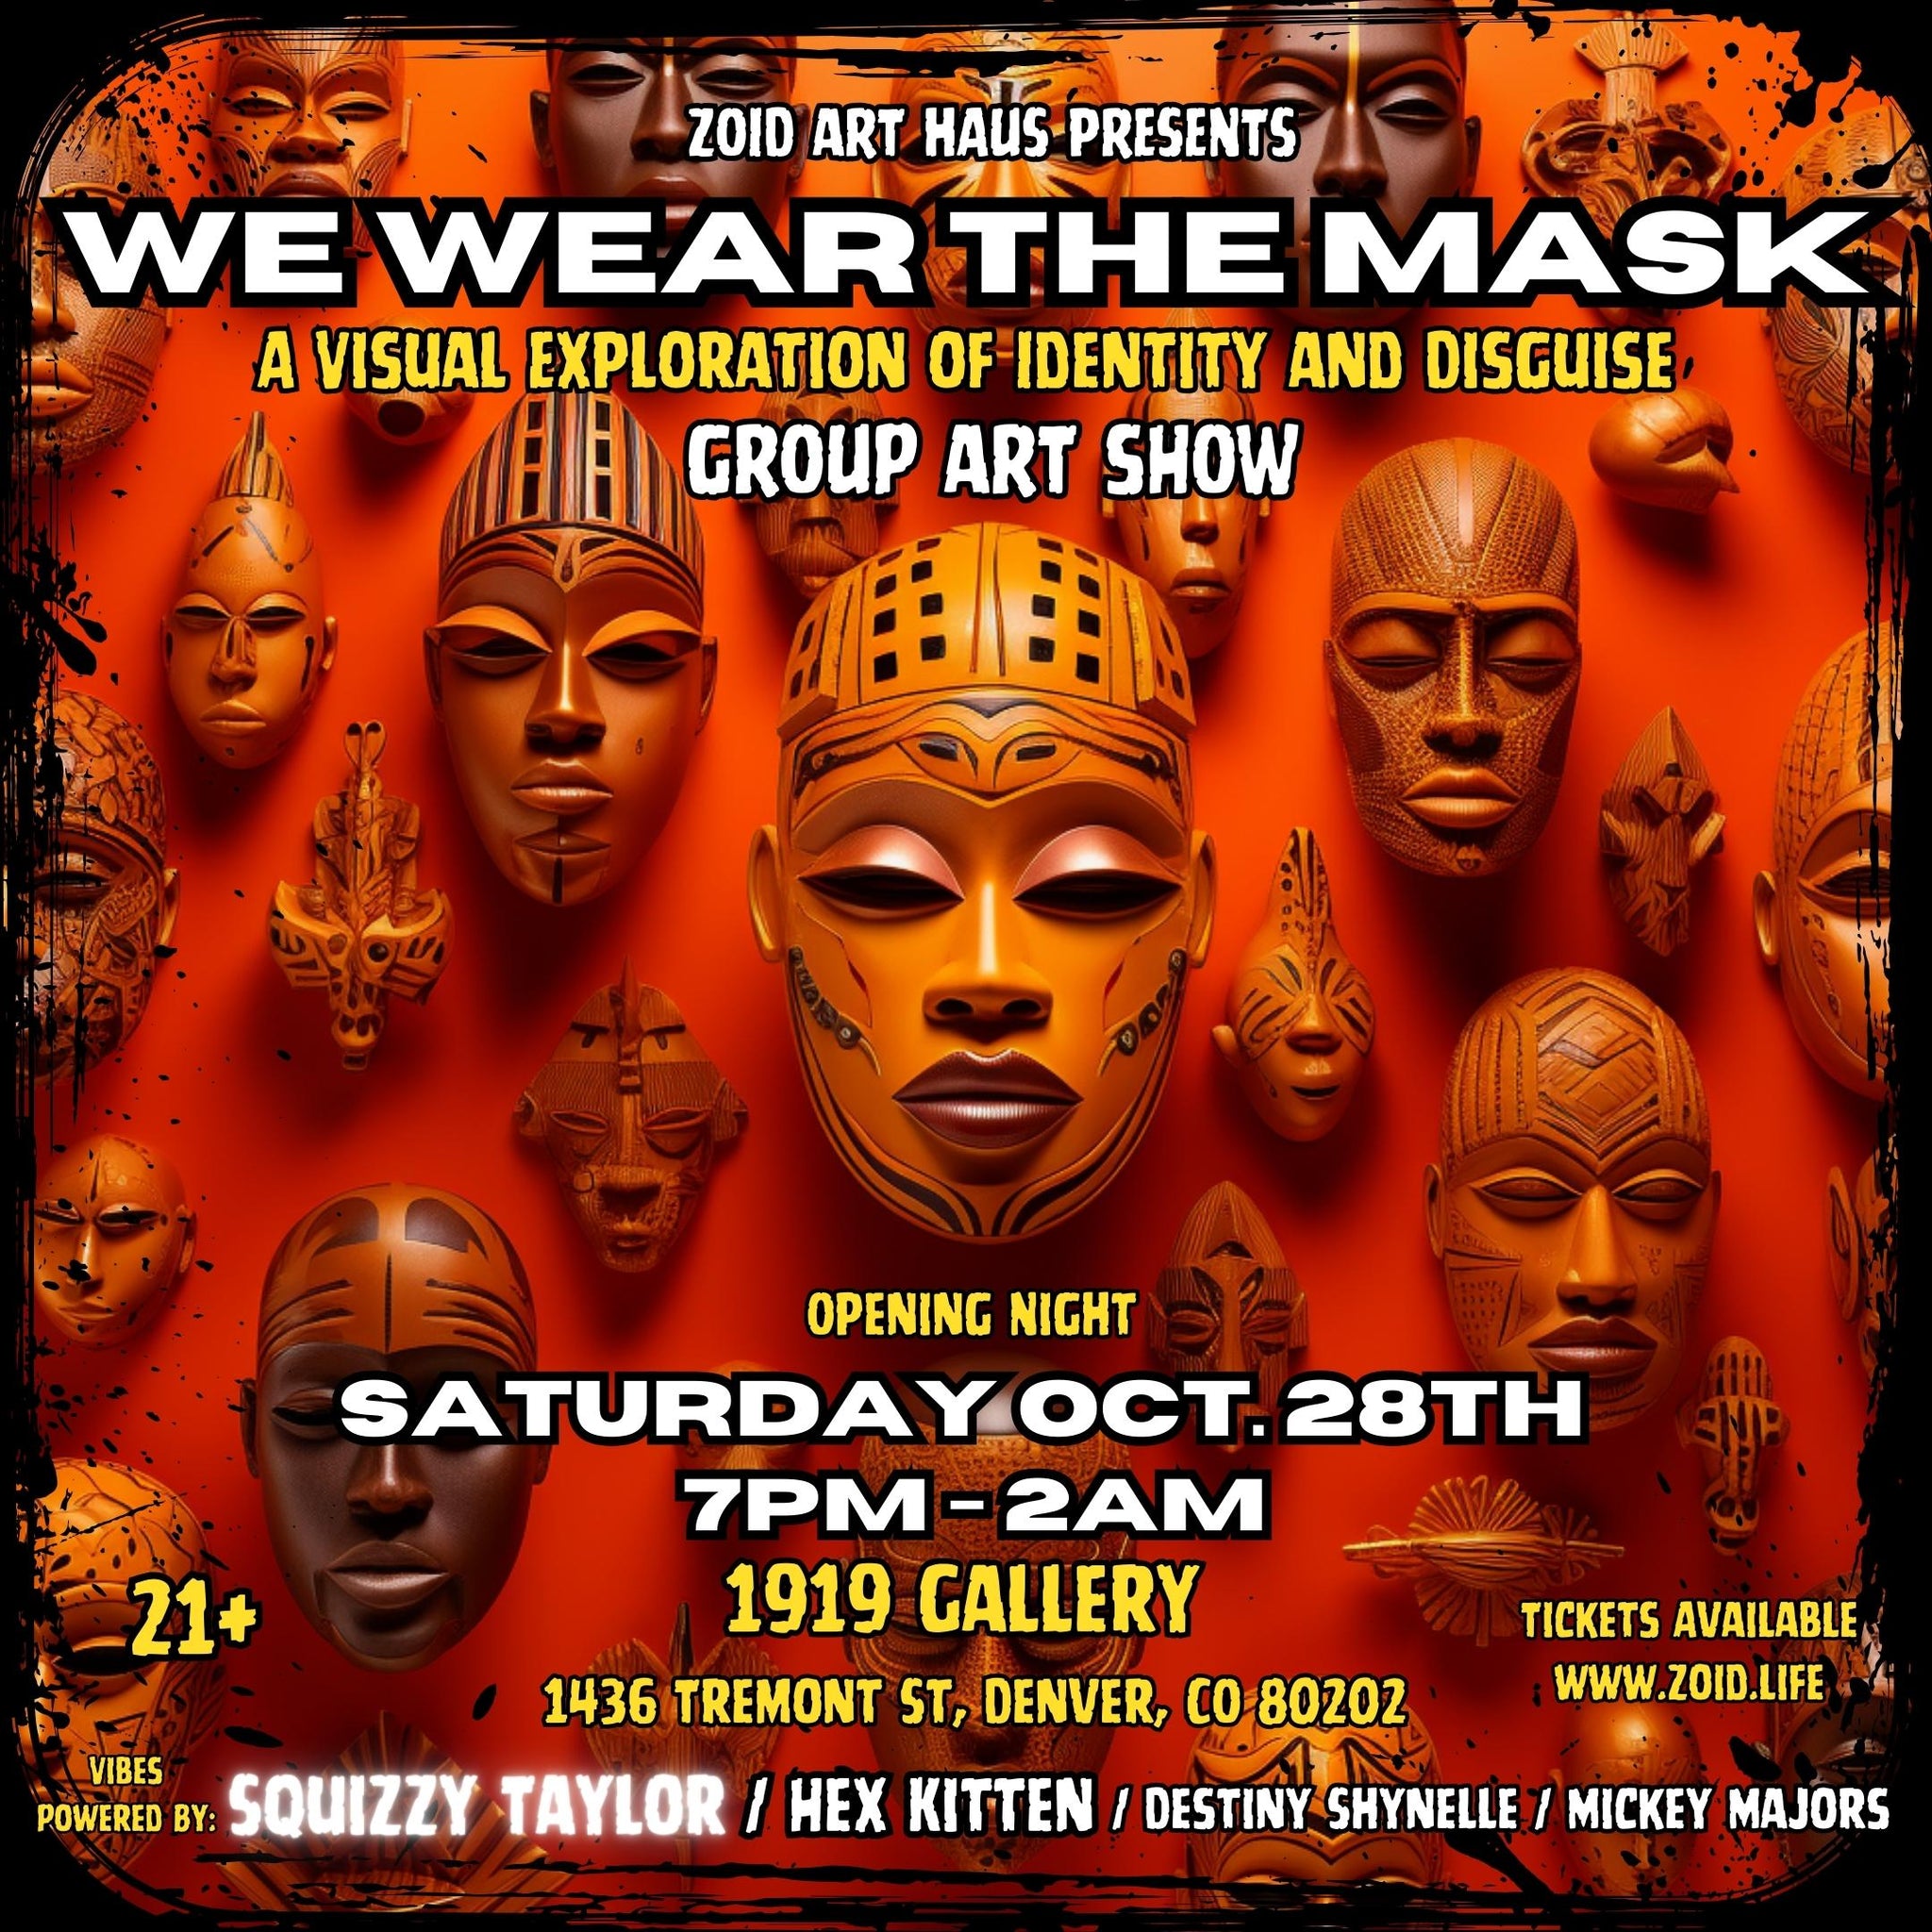 We Wear The Mask Art Exhibition